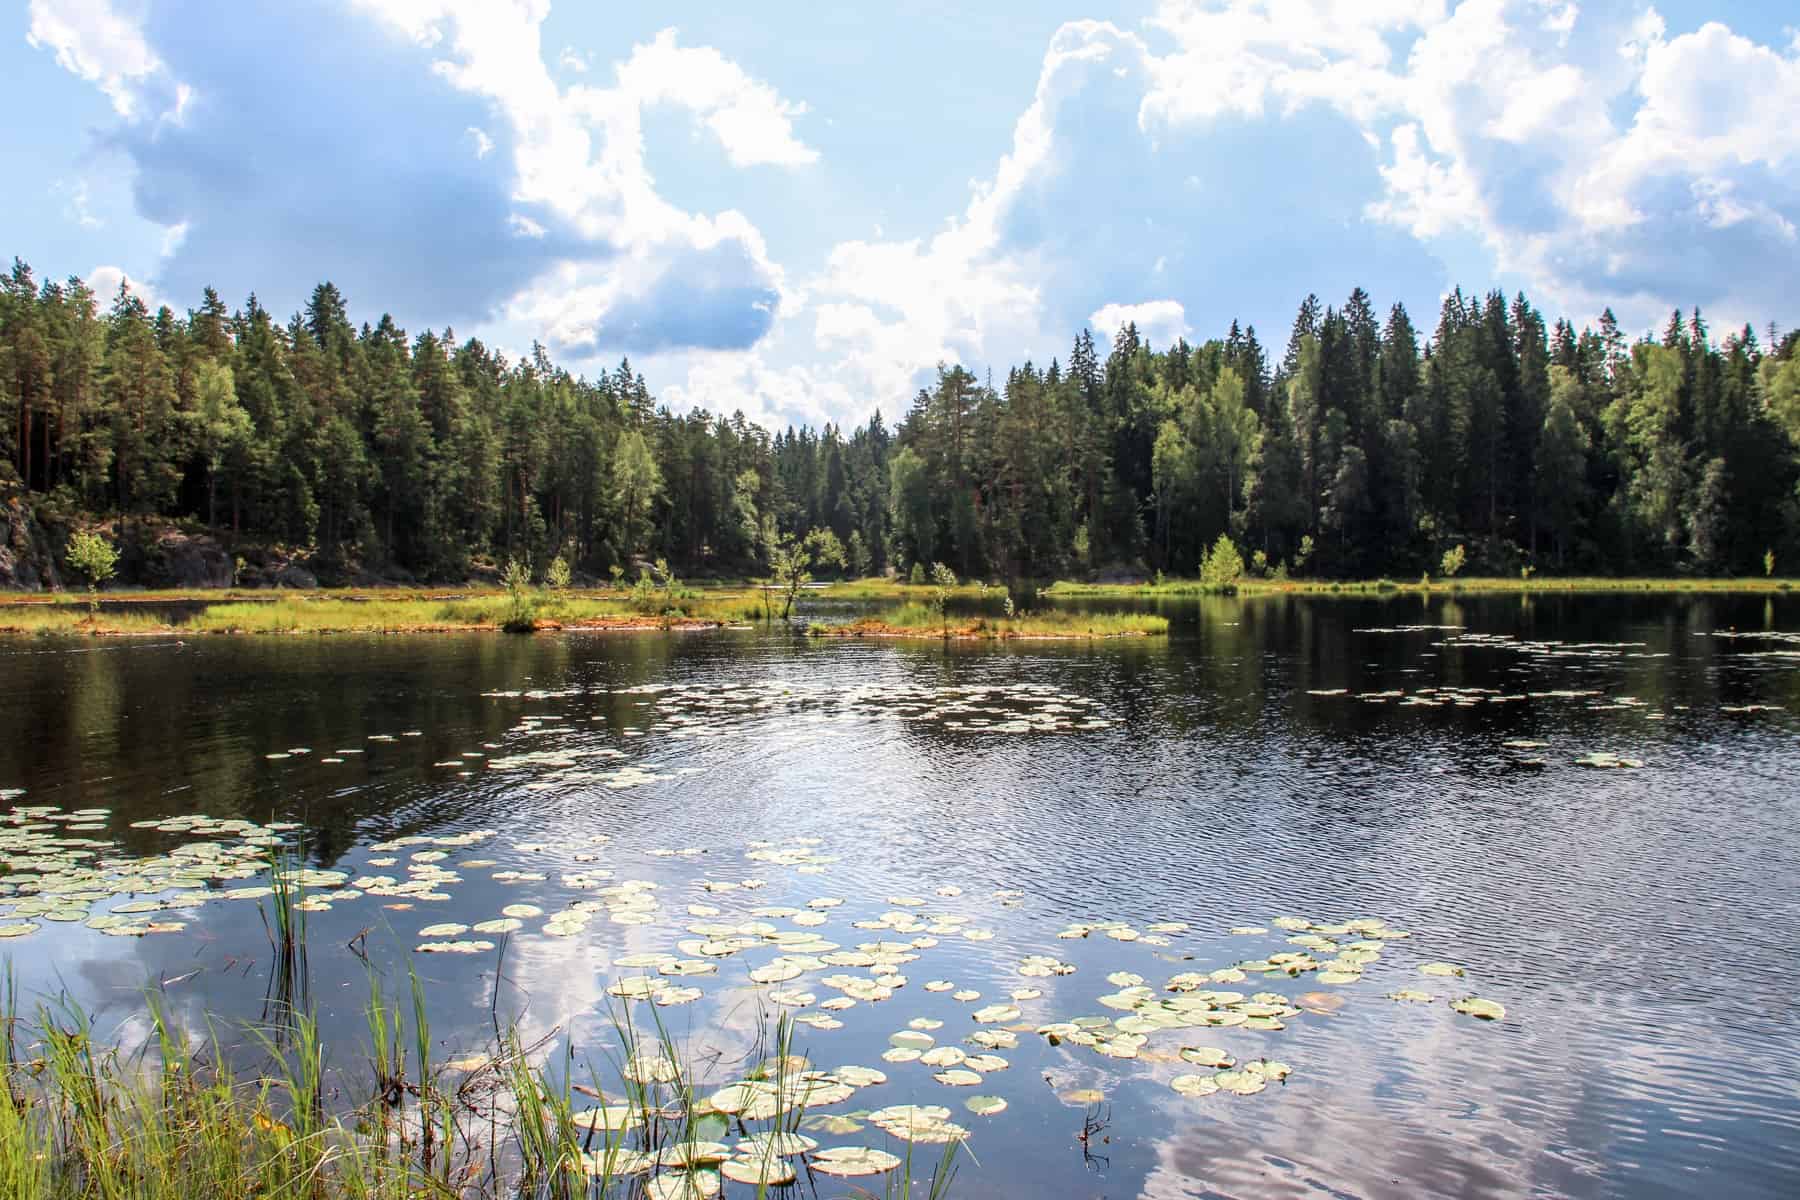 The still lake set within a dense forest in Nuuksio National Park in Finland, where the Everyman's Right law allows people to visit freely. 